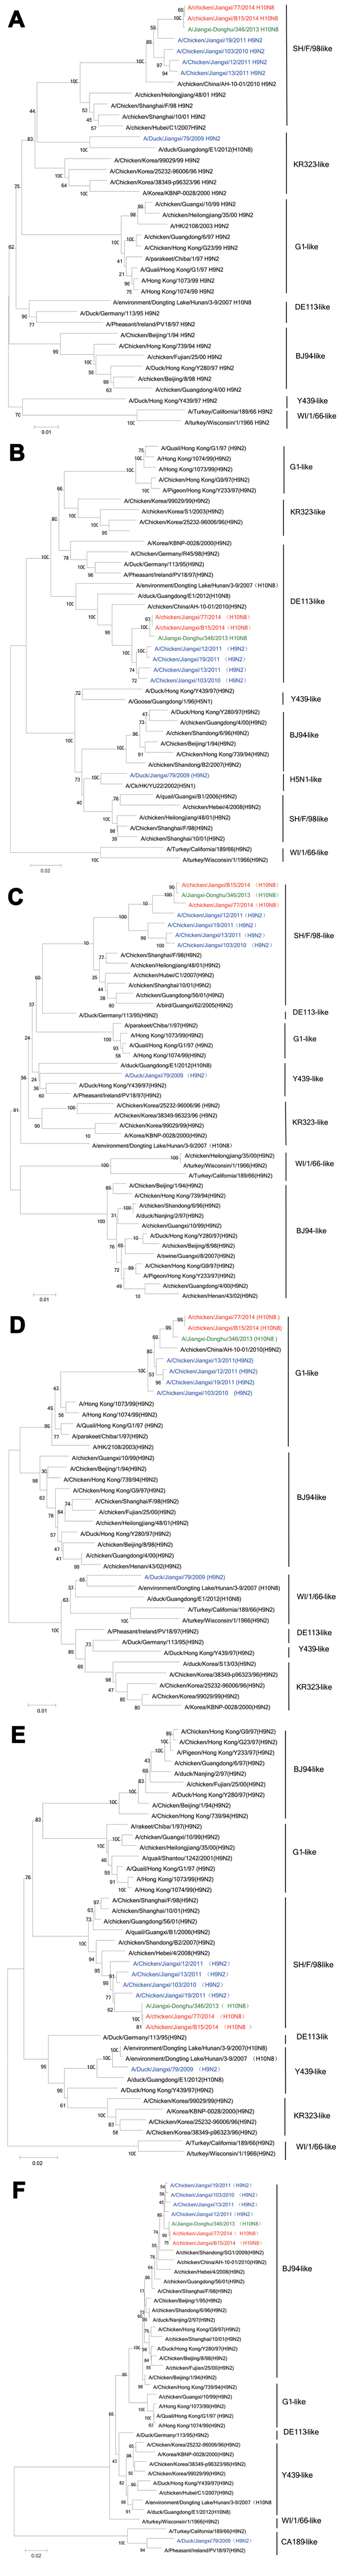 Phylogenetic trees of the internal genes of influenza virus A(H10N8) isolates from Jiangxi Province, China, 2013–2014, compared with other closely related influenza viruses. A) Polymerase basic 1; B) polymerase basic 2; C) nucleoprotein; D) matrix; E) polymerase acidic; F) nonstructural. Red indicates the novel H10N8 isolates A/chicken/Jiangxi/77/2013 (H10N8) and A/chicken/Jiangxi/B15/2014 (H10N8) that were identified in this study from poultry from live poultry markets; green indicates the huma